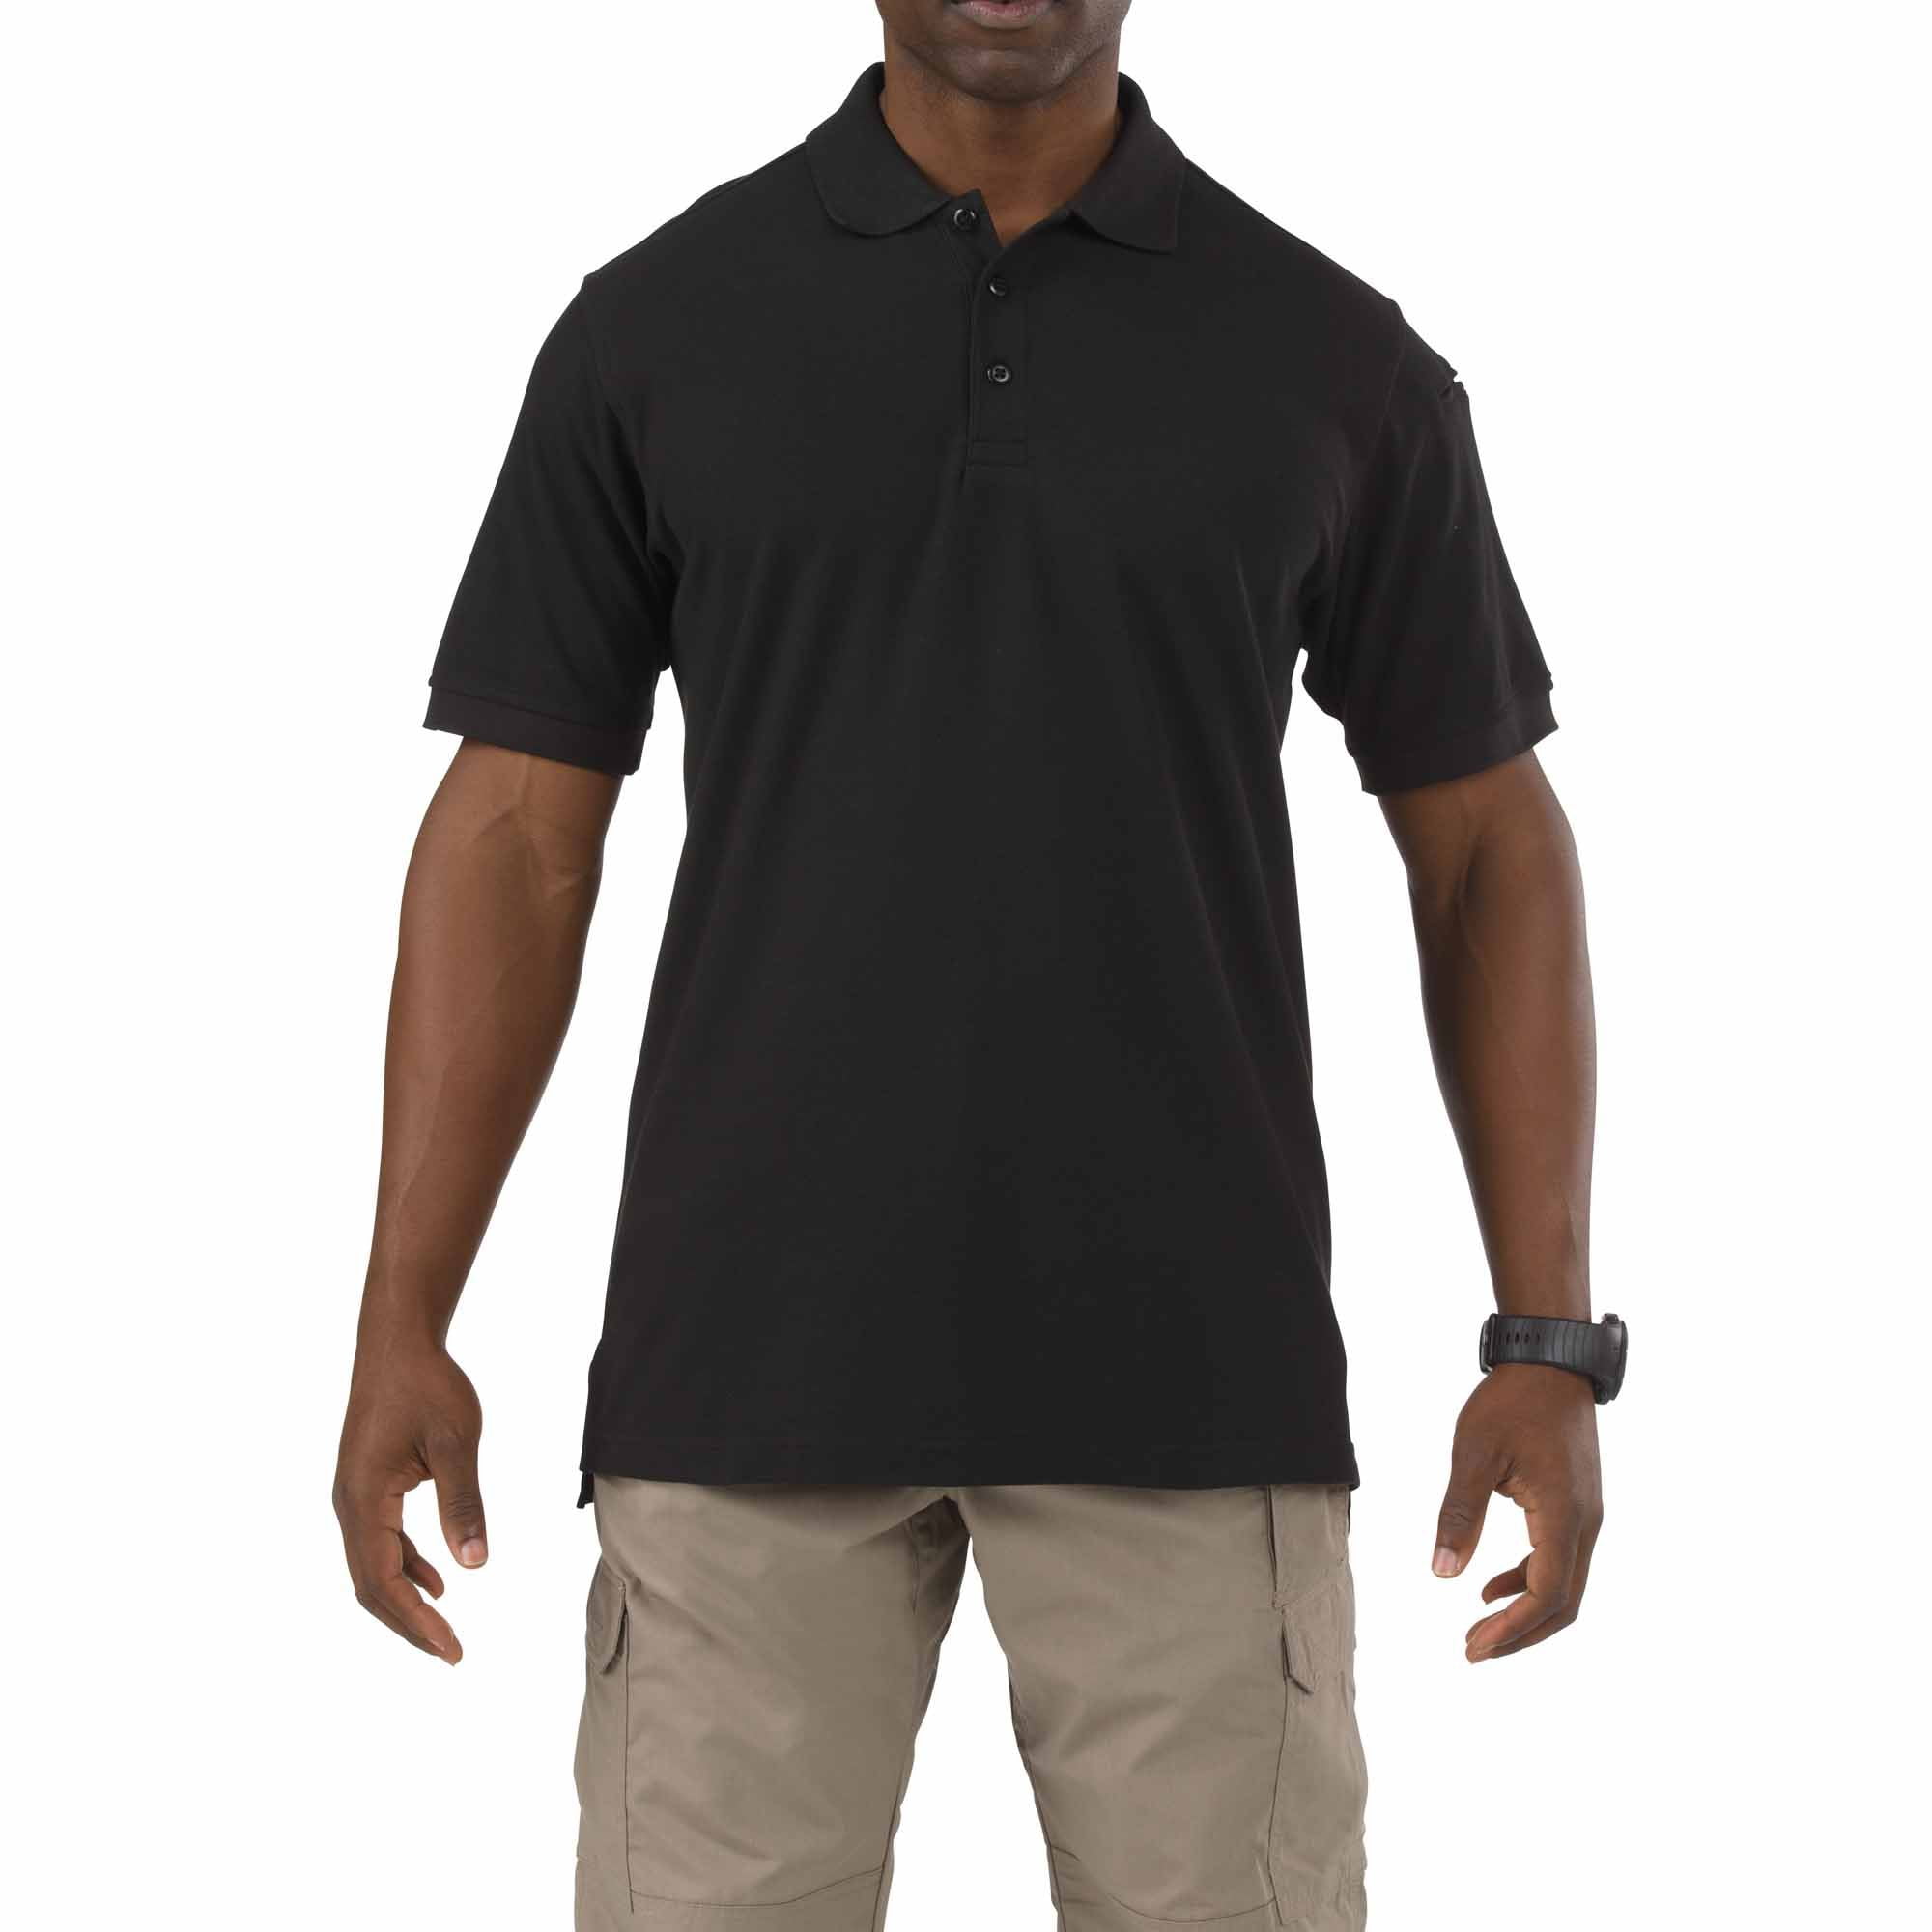 5.11 Work Gear Men's Utility Short Sleeve Polo Shirt, Poly-Cotton Fabric,  Wrinkle Resistant, Black, X-Large, Style 41180 